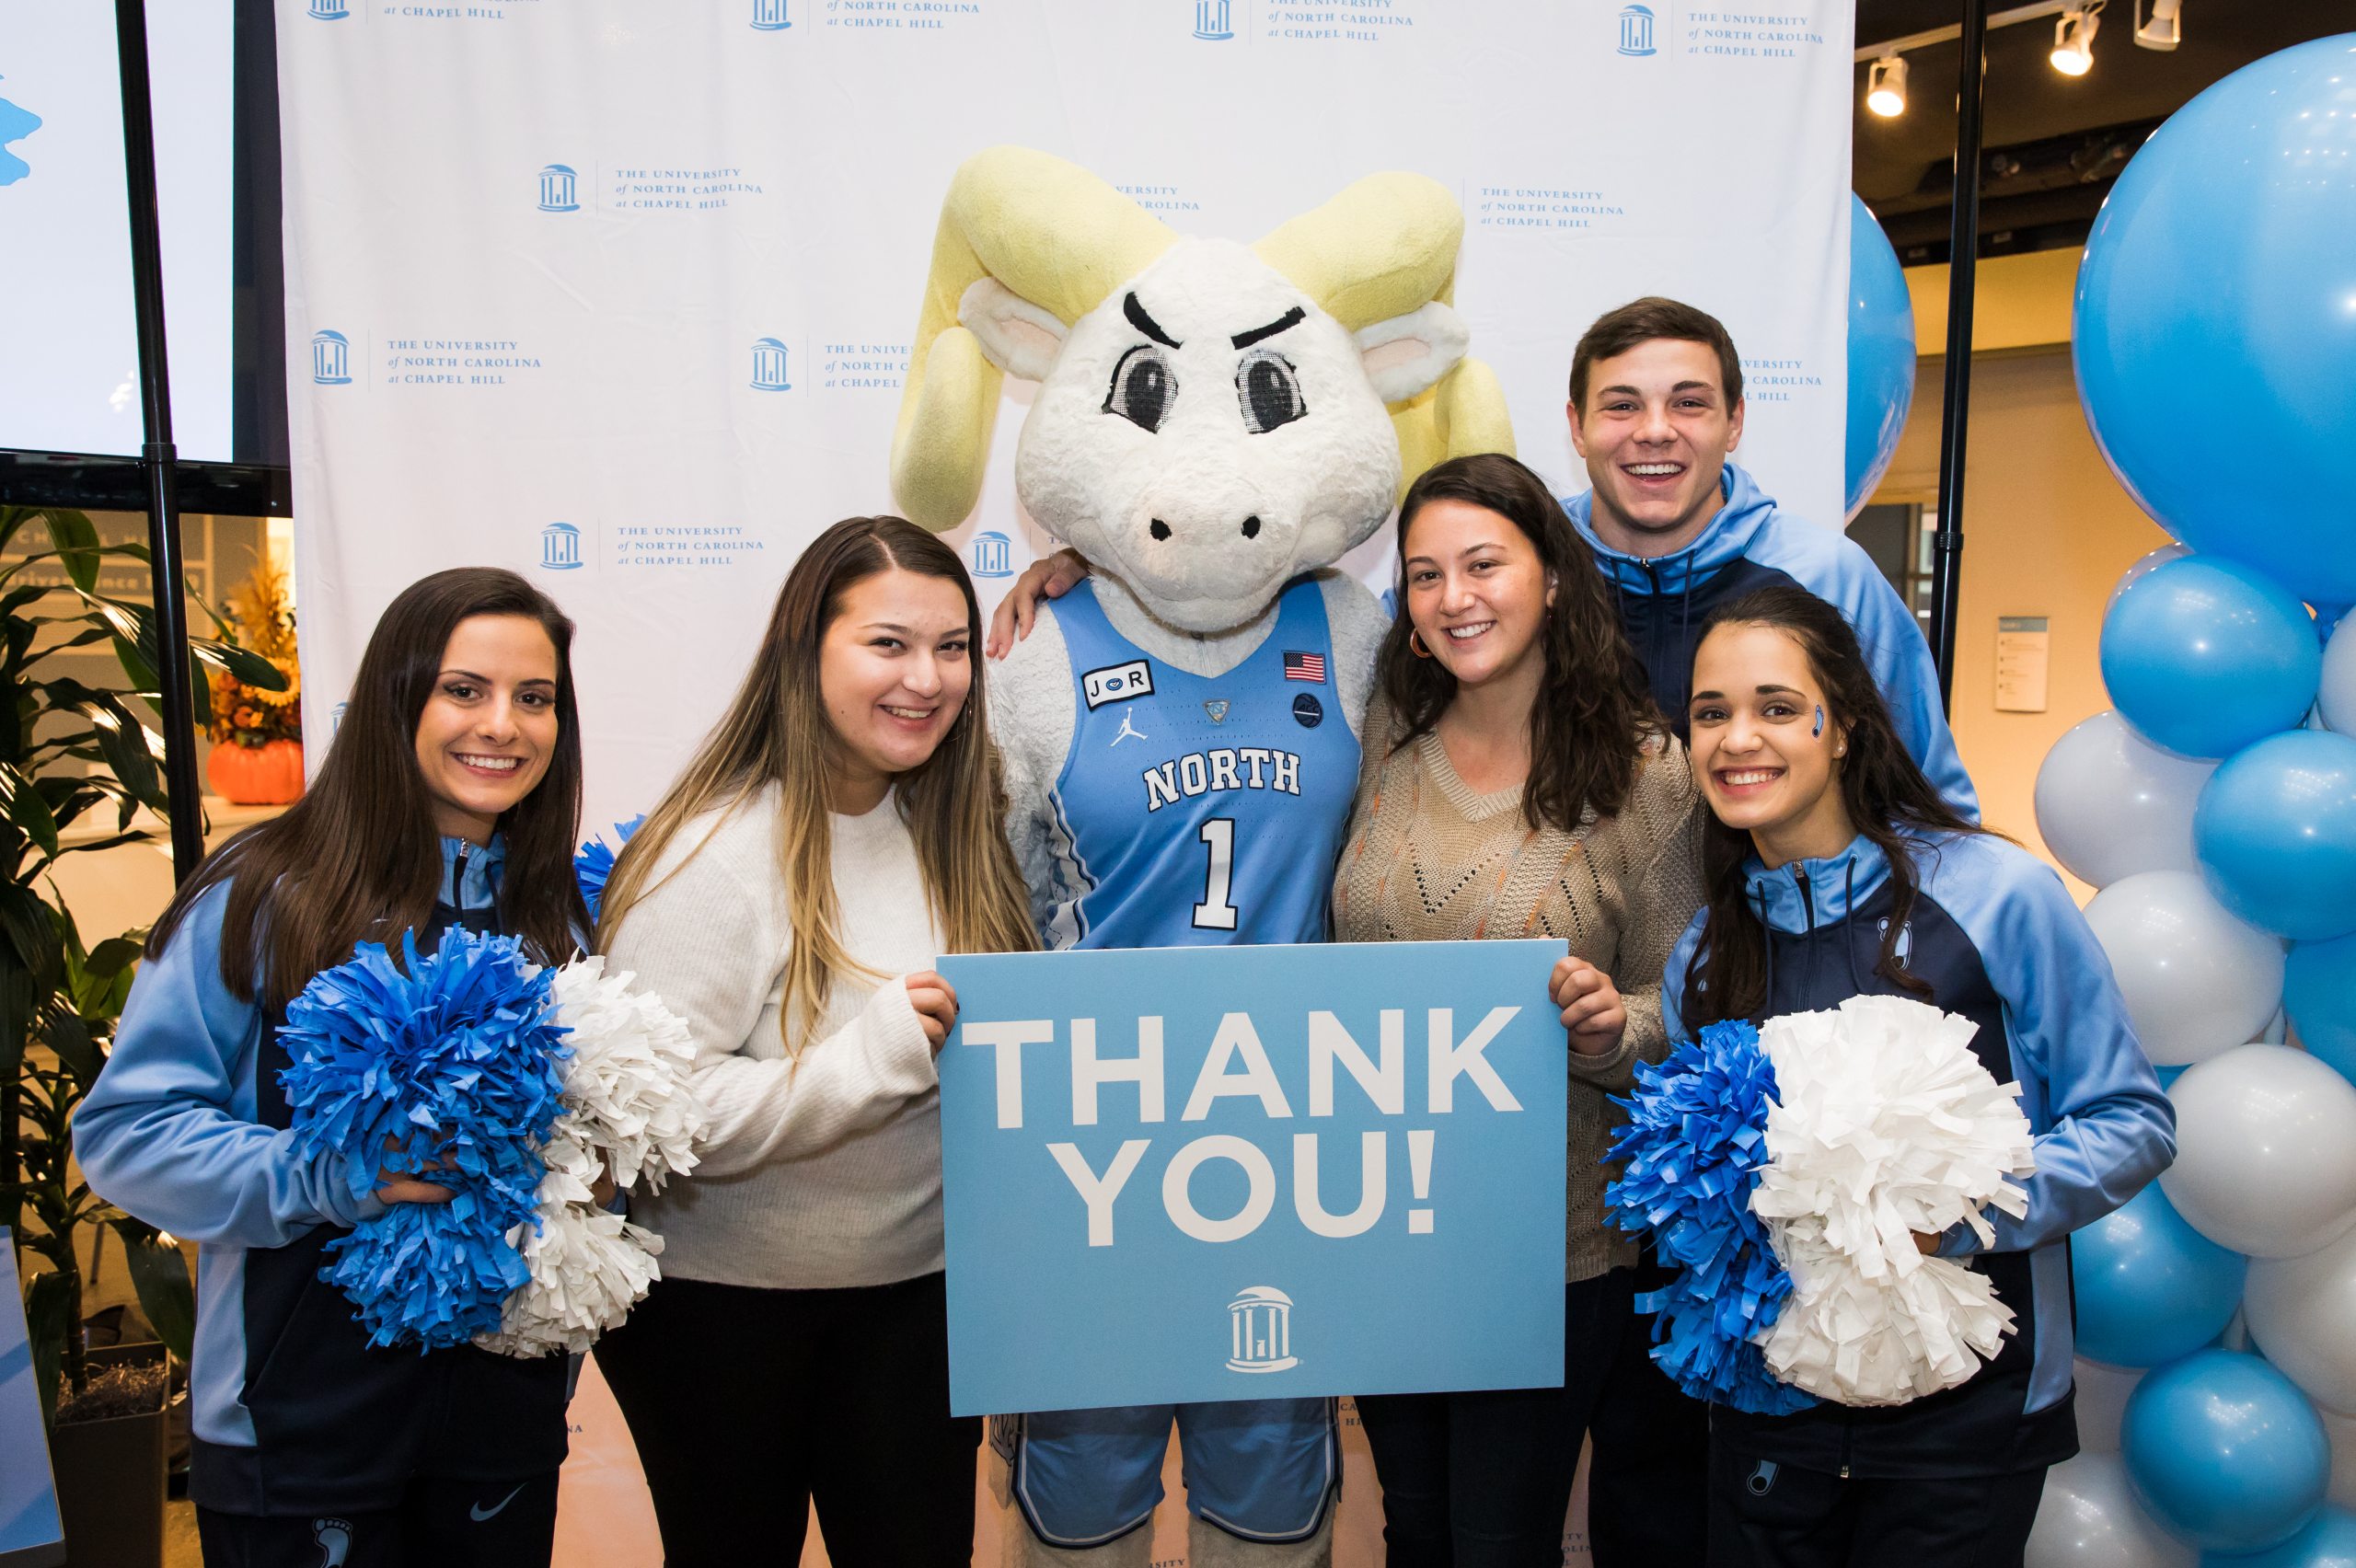 Five students and the Tar Heels mascot Rameses smile at the camera and hold pom poms and a thank you sign